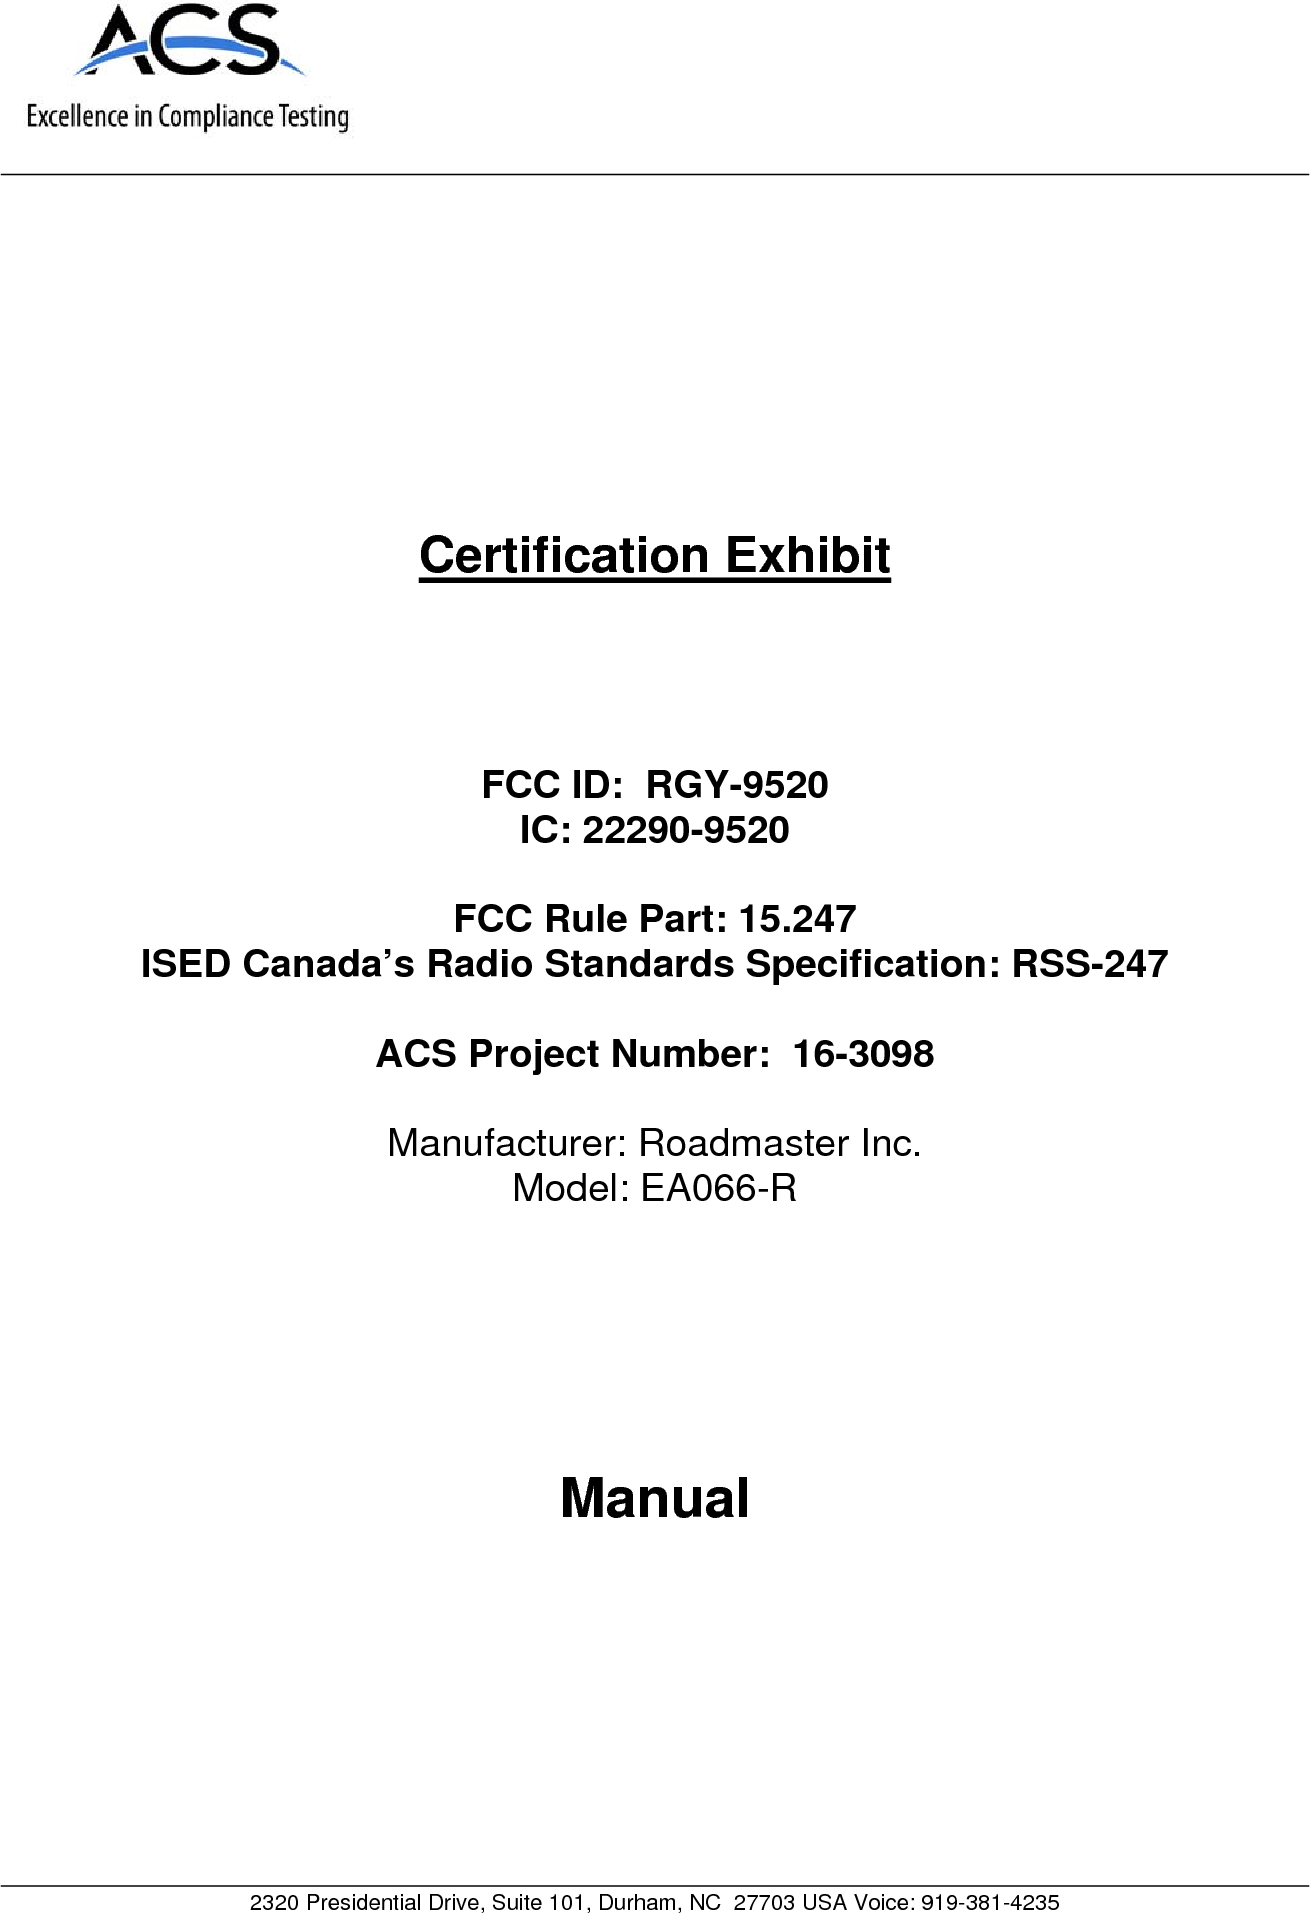     2320 Presidential Drive, Suite 101, Durham, NC  27703 USA Voice: 919-381-4235     Certification Exhibit     FCC ID:  RGY-9520 IC: 22290-9520  FCC Rule Part: 15.247 ISED Canada’s Radio Standards Specification: RSS-247  ACS Project Number:  16-3098   Manufacturer: Roadmaster Inc. Model: EA066-R     Manual  